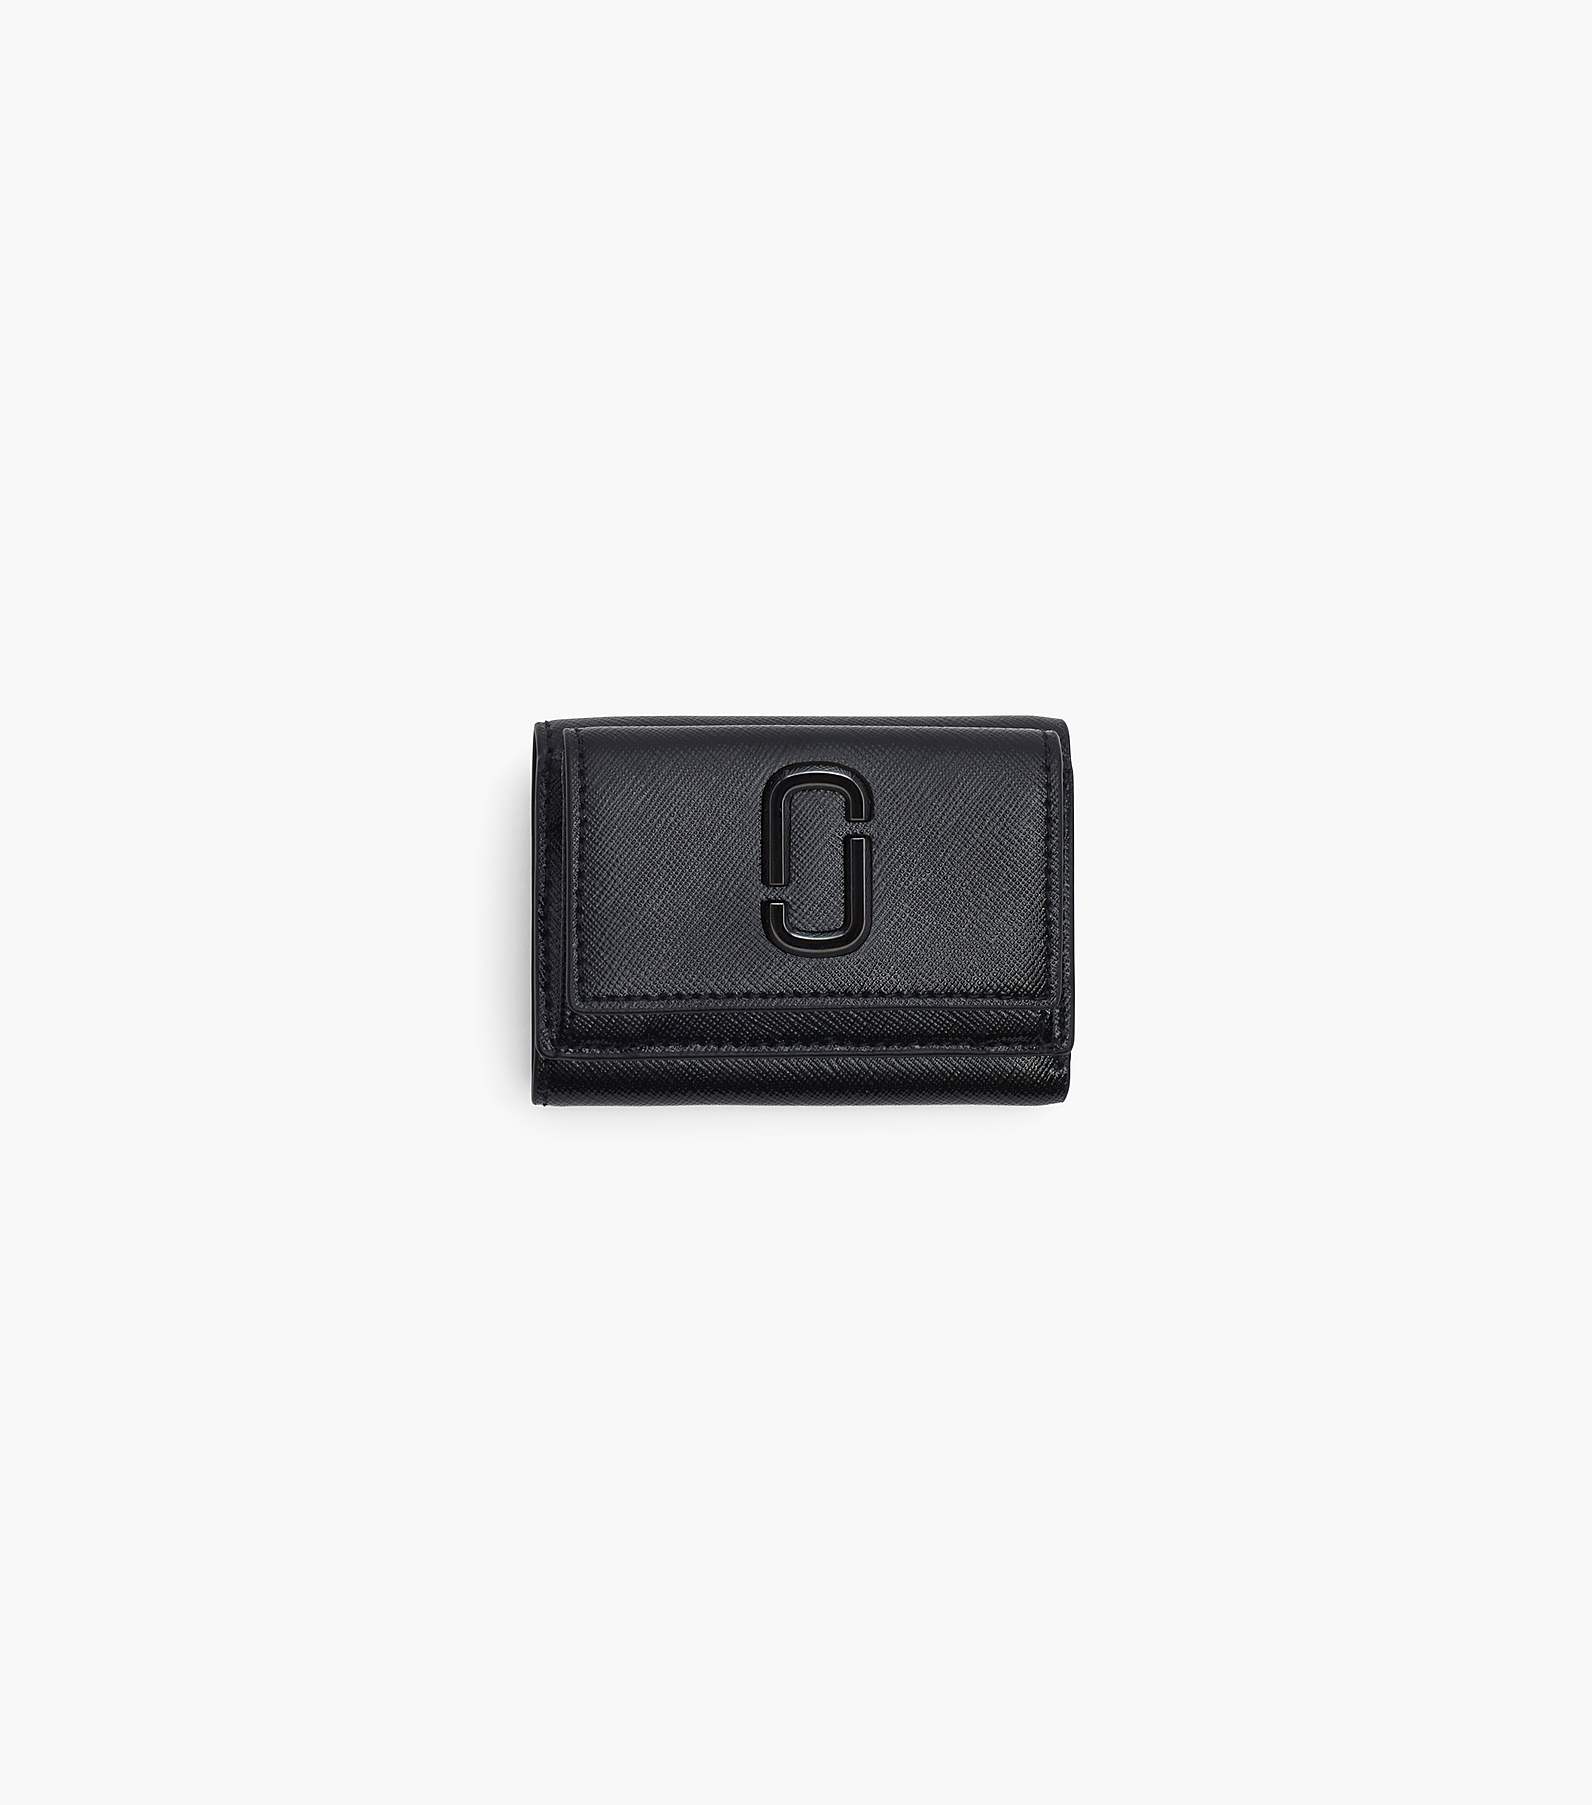 THE DTM UTILITY SNAPSHOT TRIFOLD WALLET MINI | マーク ジェイコブス